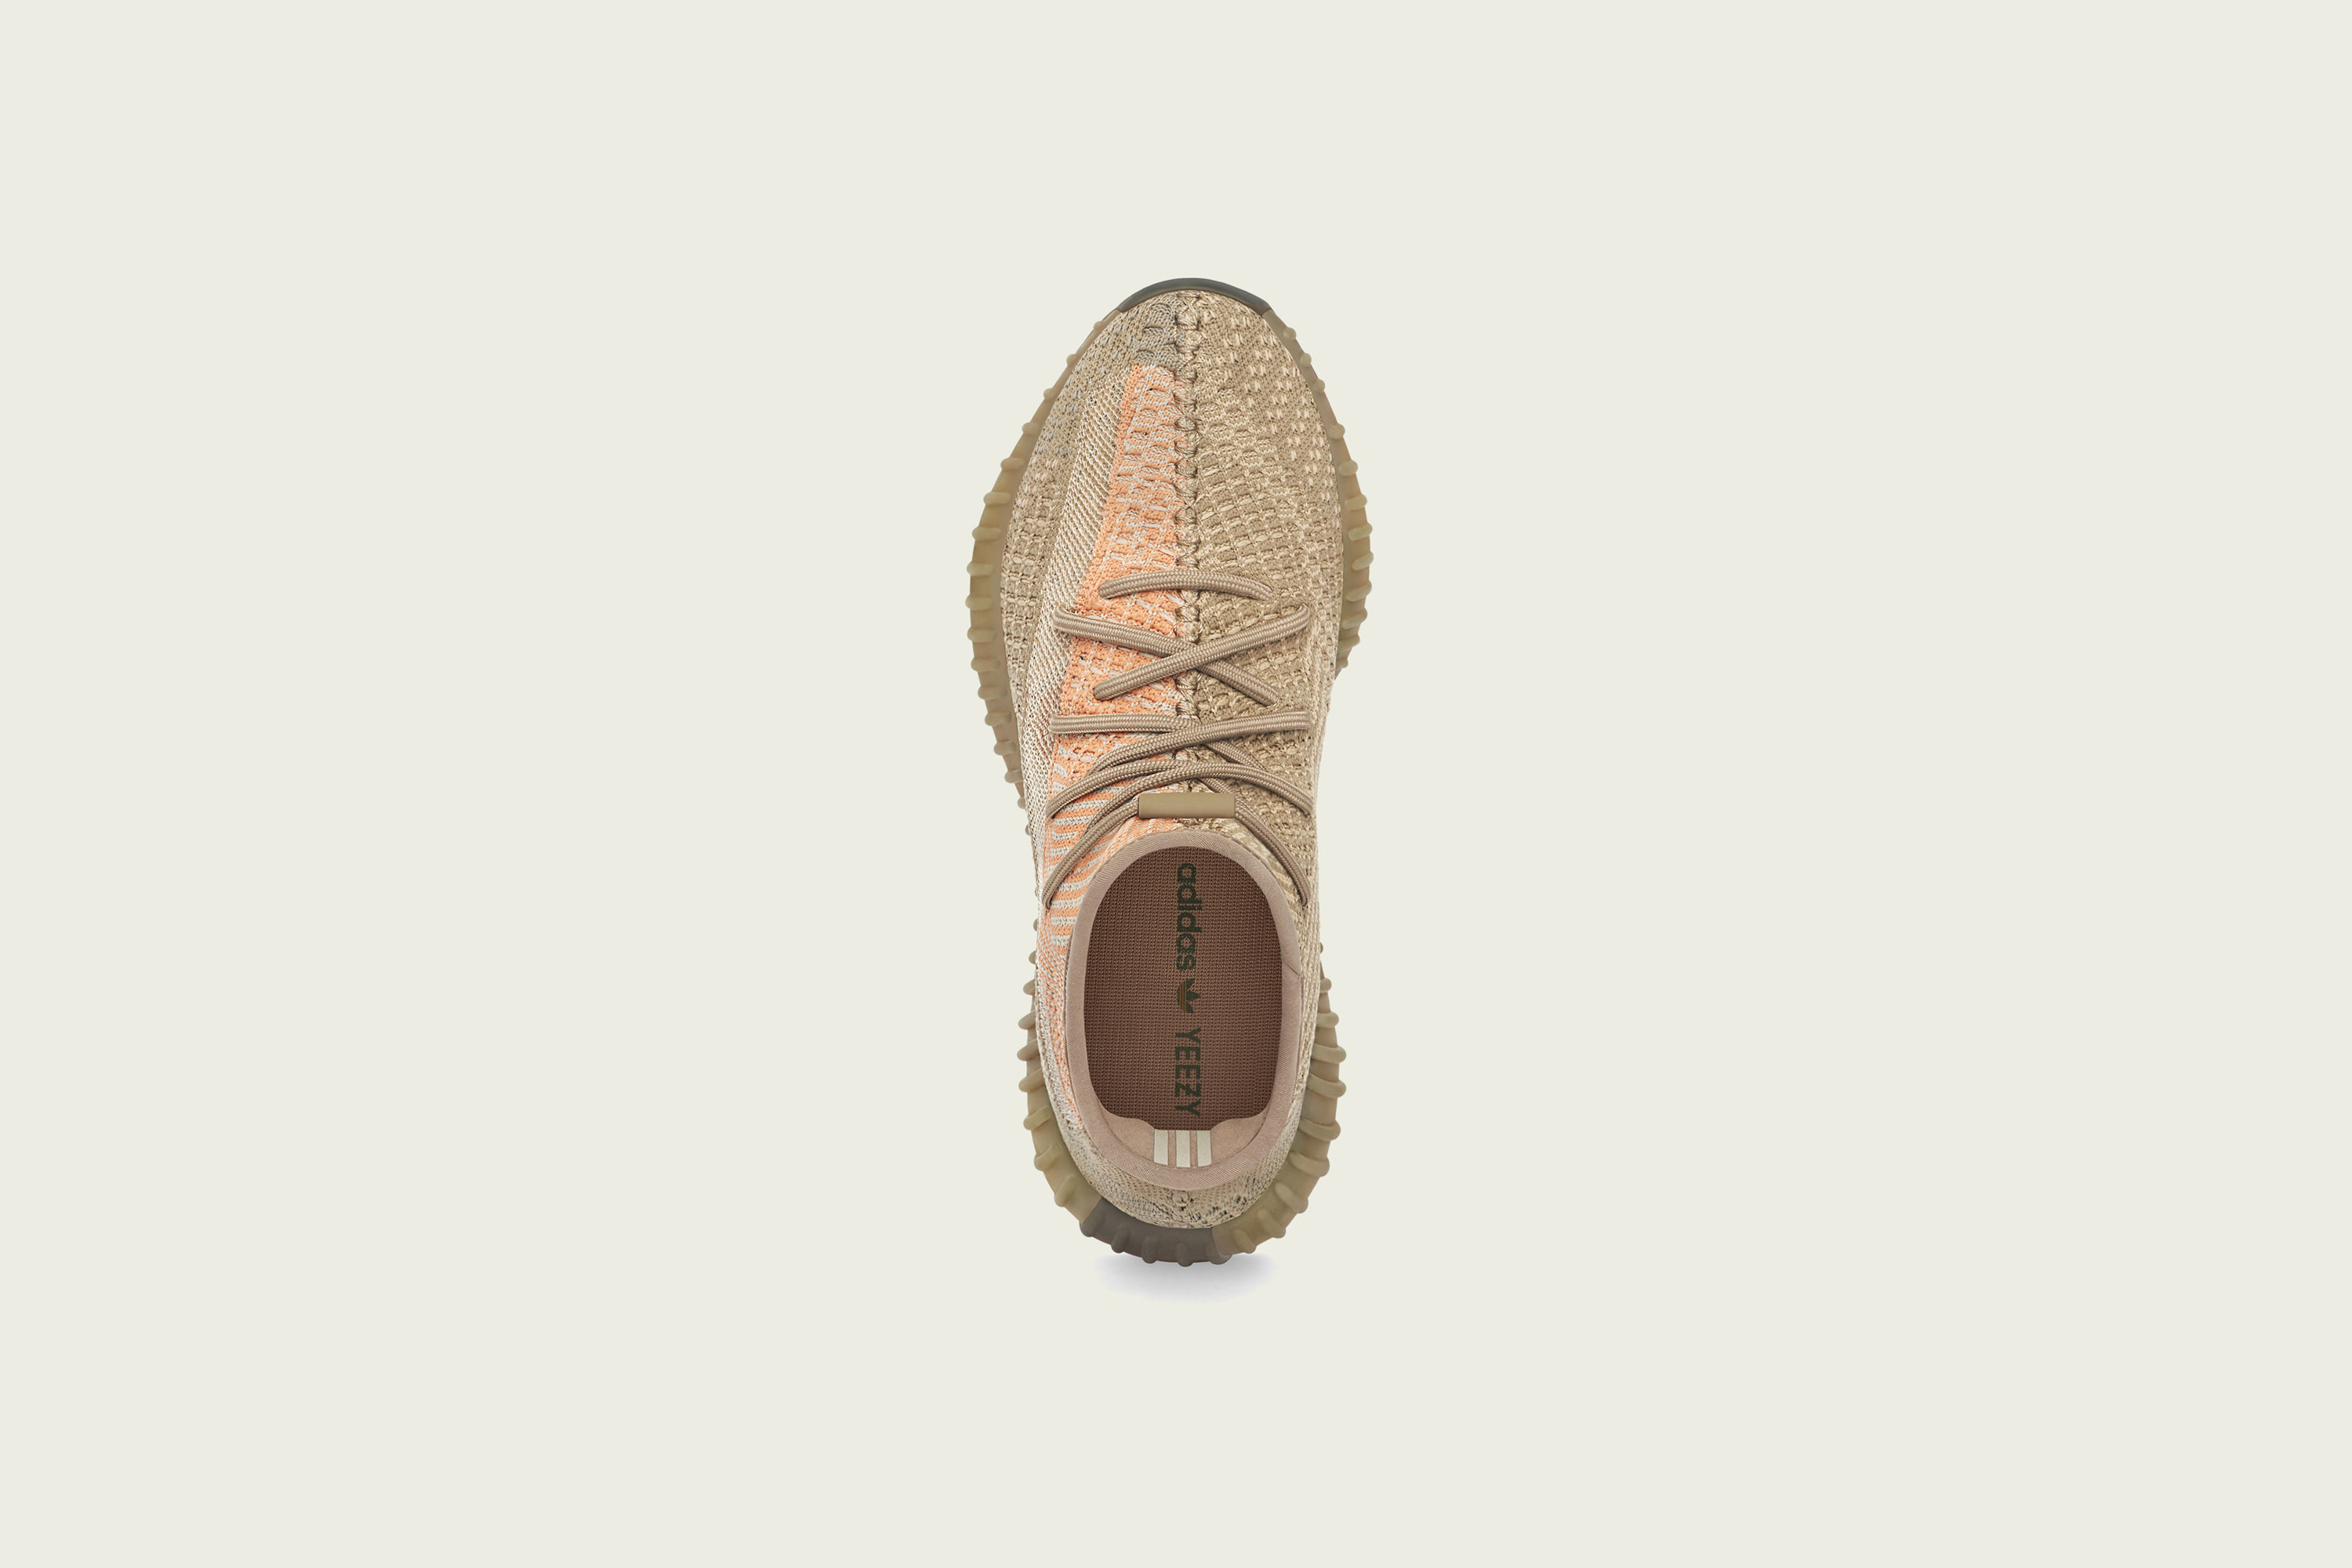 adidas - Yeezy Boost 350v2 - Sand/Taupe - Up There